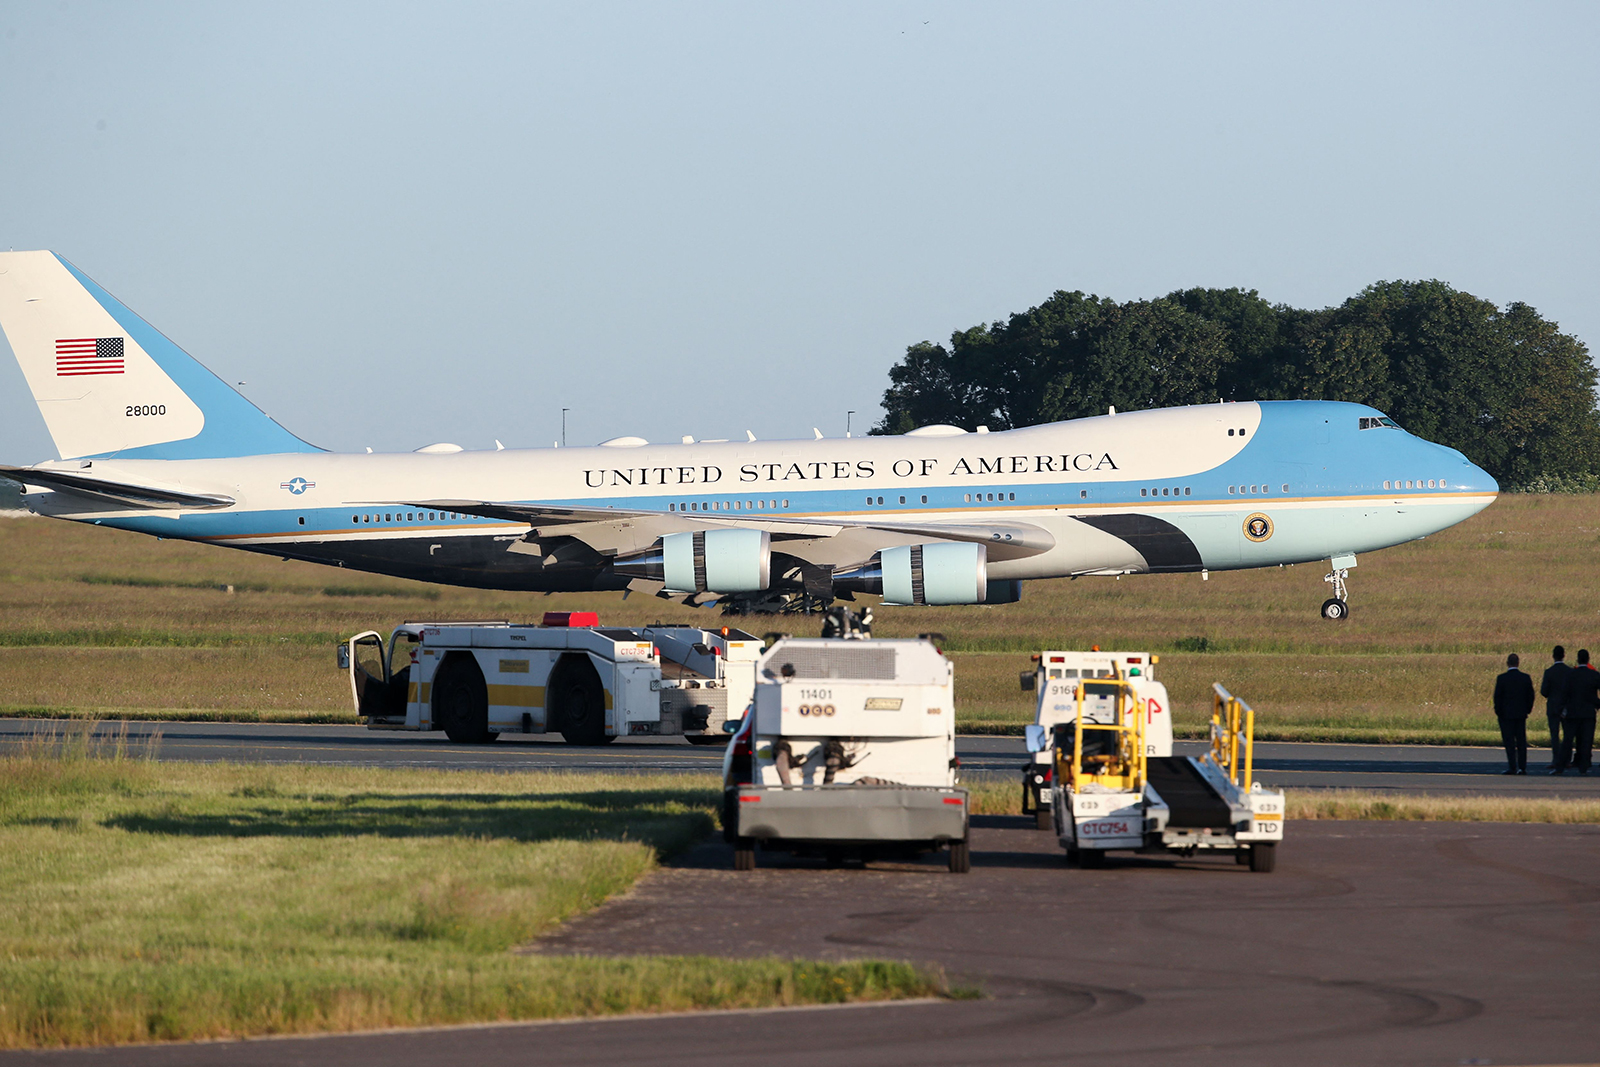 US President Joe Biden arrives aboard the Air Force One at Melsbroek Military Airport in Brussels, on June 13, ahead of the Nato Summit and EU-US summit.